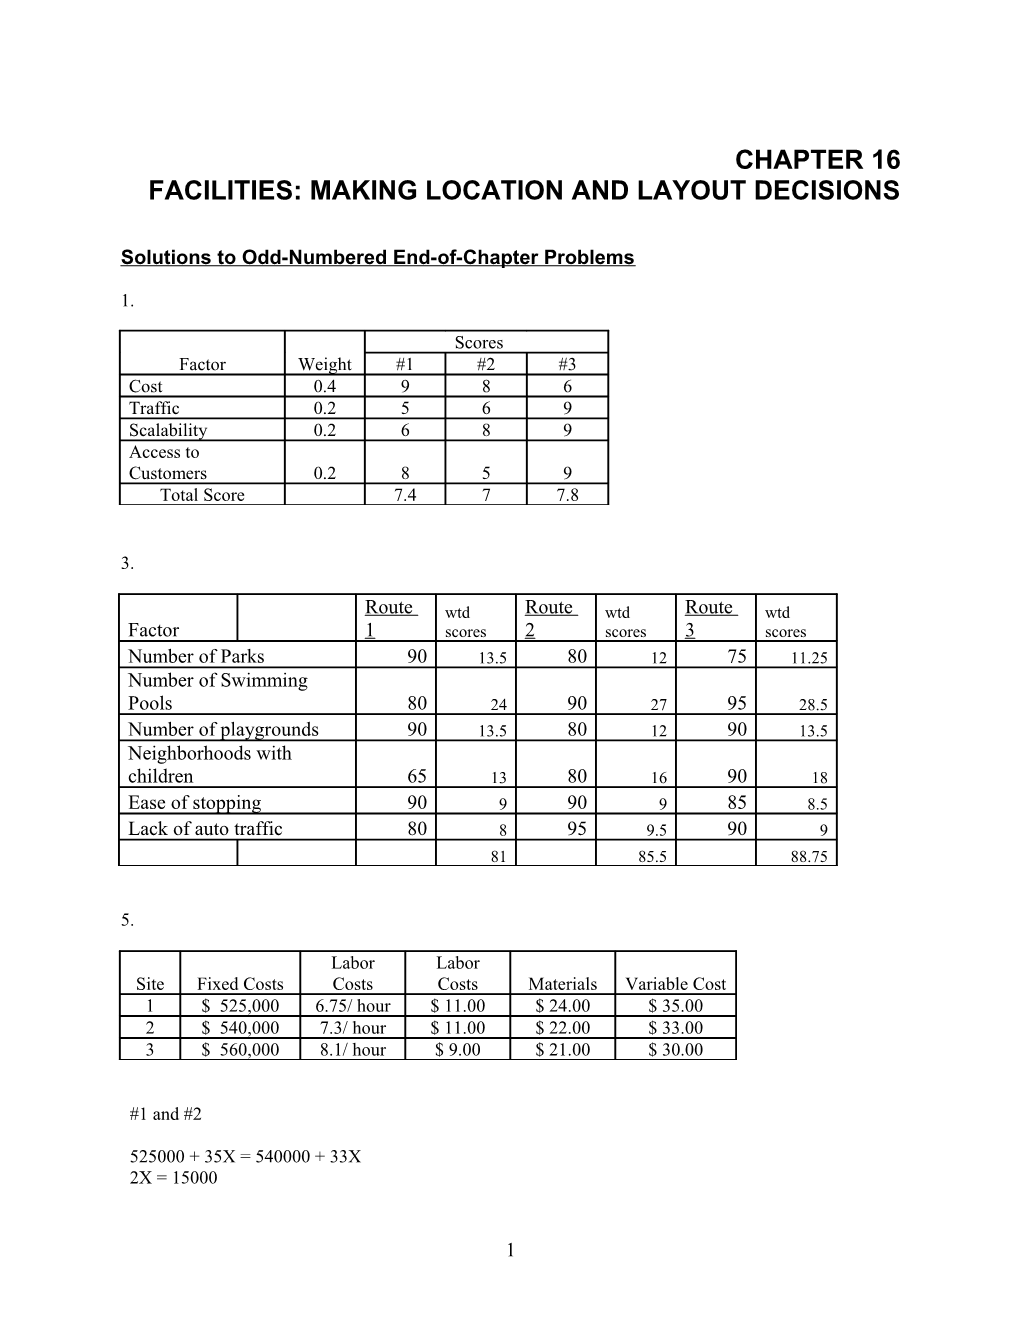 Facilities: Making Location and Layout Decisions